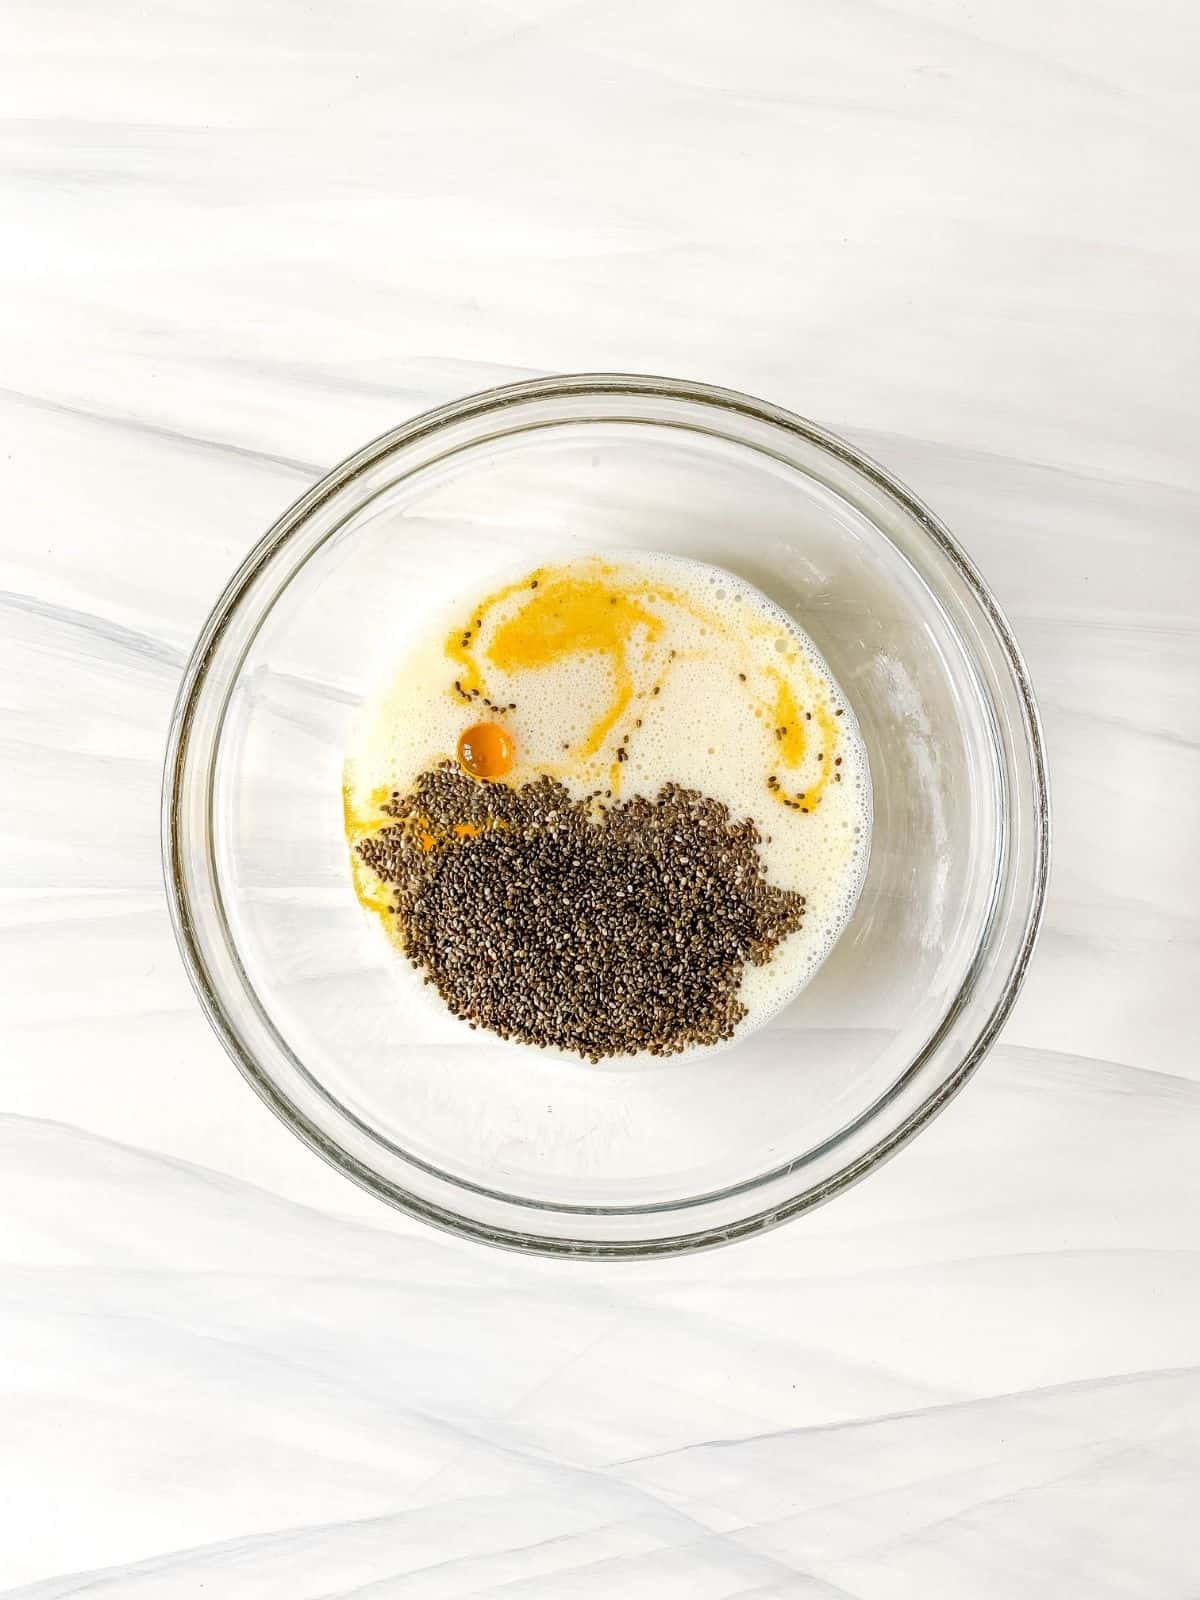 non-dairy milk, chia seeds and turmeric in a glass bowl.